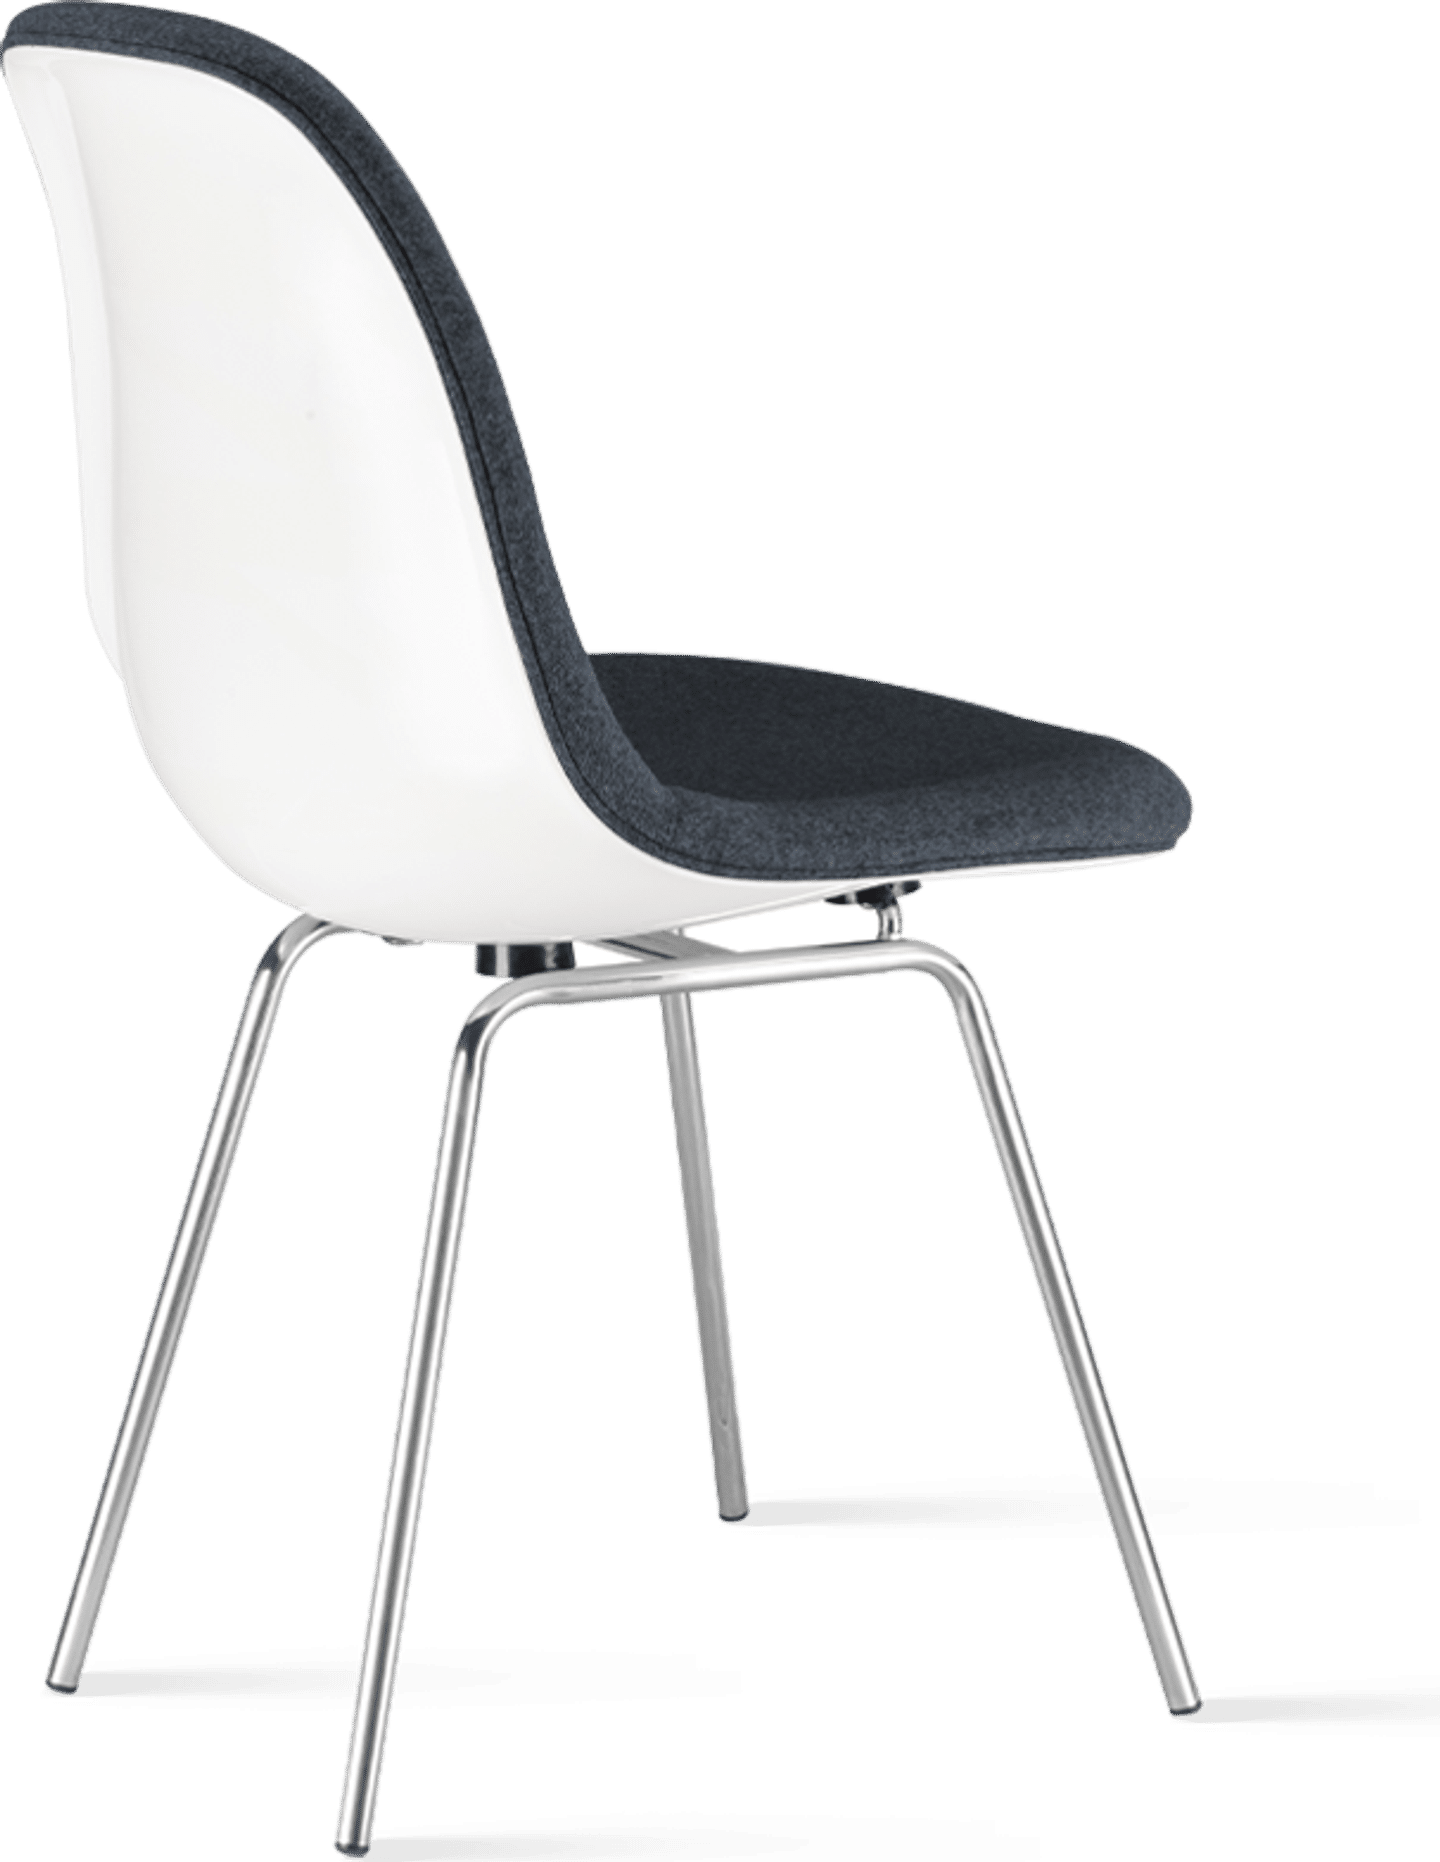 DSX Style Upholstered Dining Chair Charcoal Grey image.